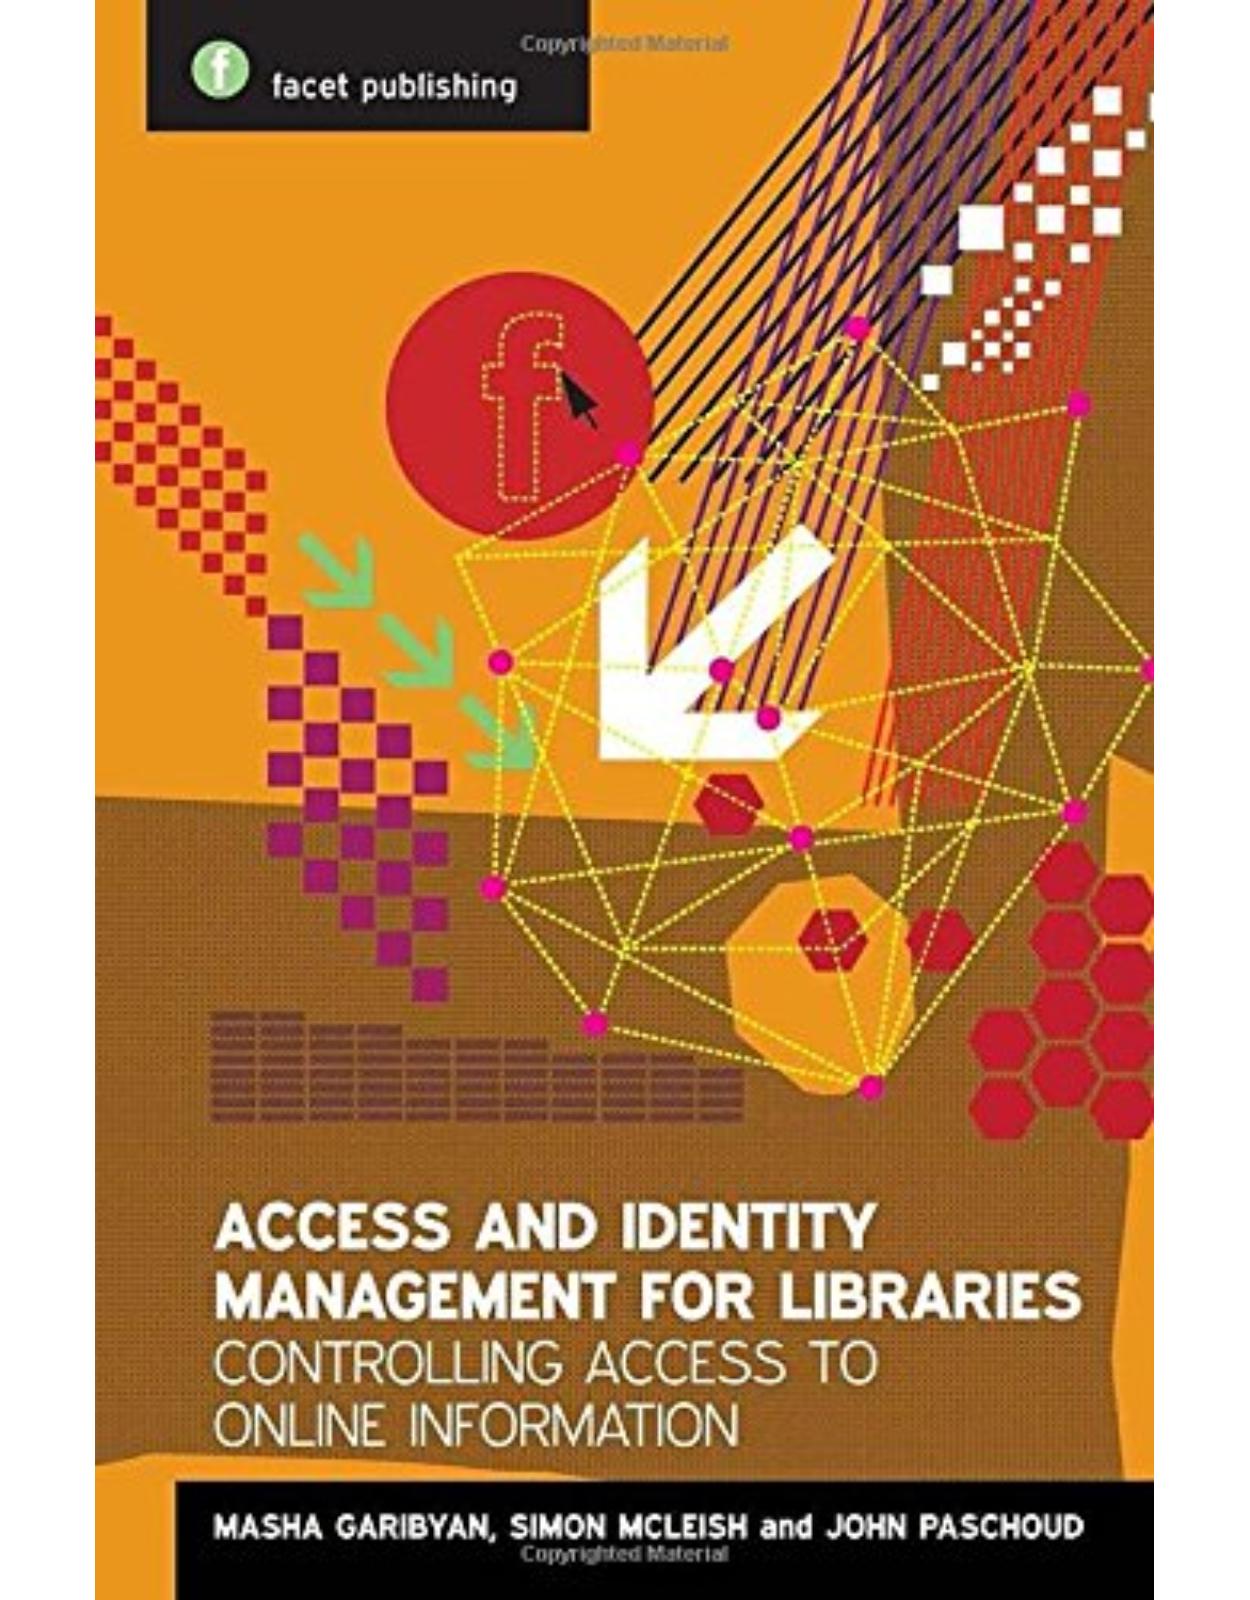 Access and Identity Management for Libraries: Controlling access to online information